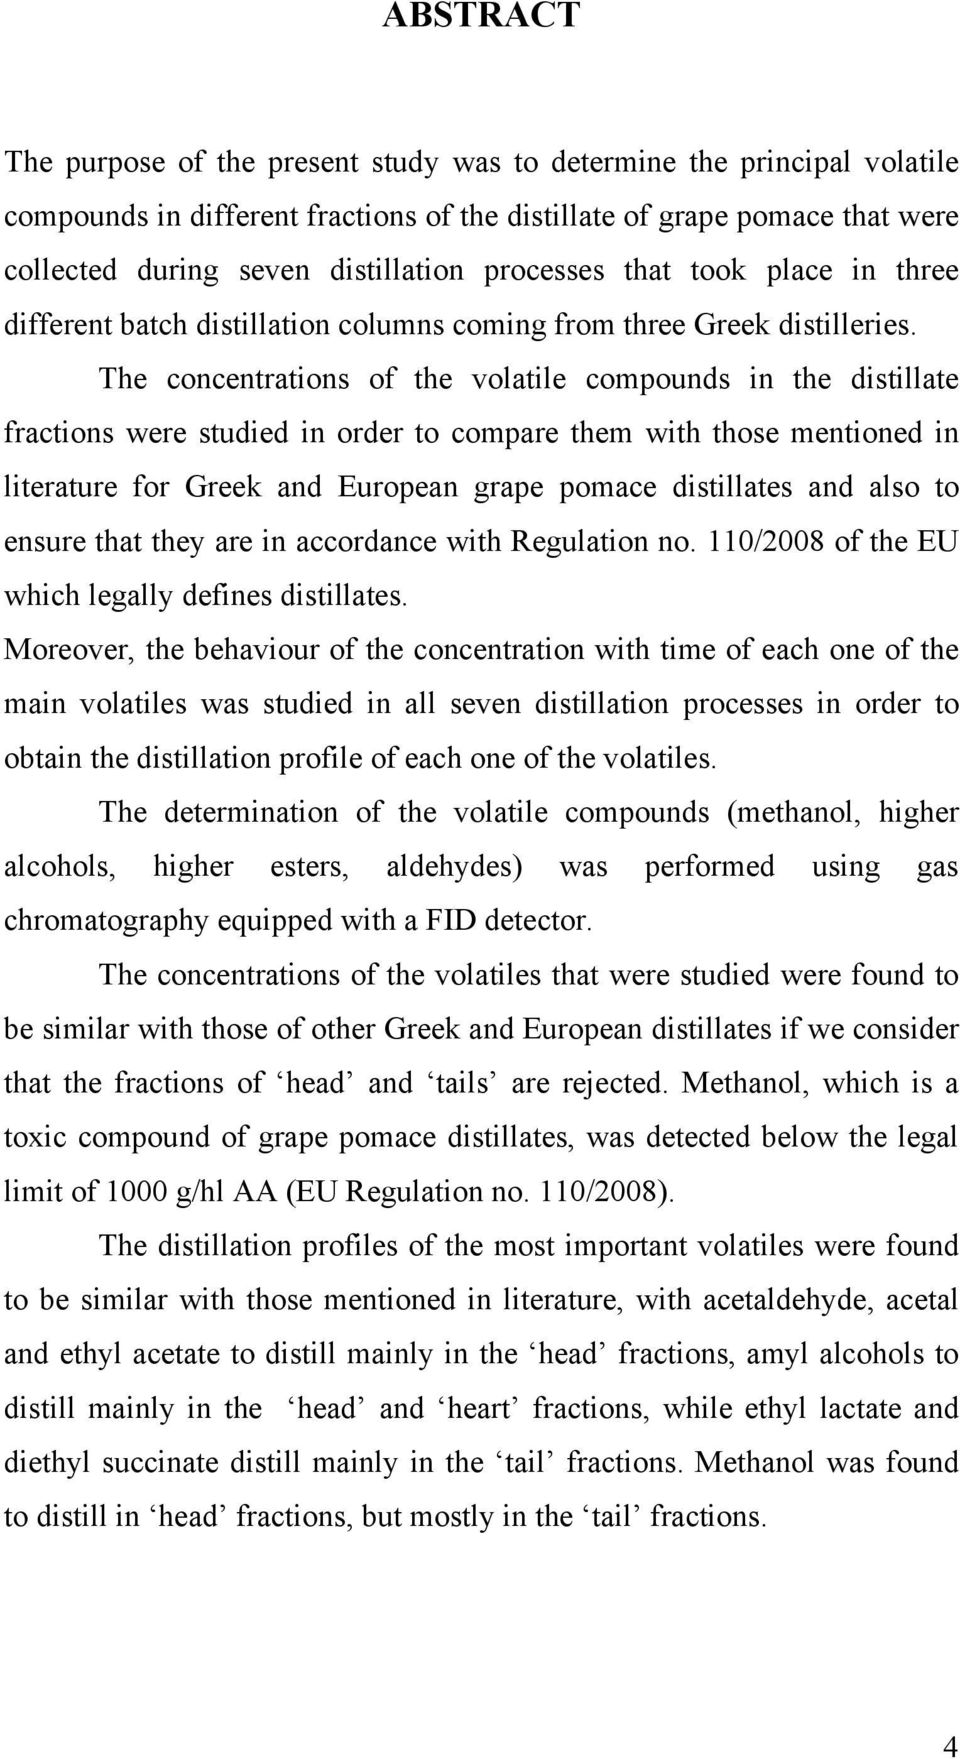 The concentrations of the volatile compounds in the distillate fractions were studied in order to compare them with those mentioned in literature for Greek and European grape pomace distillates and